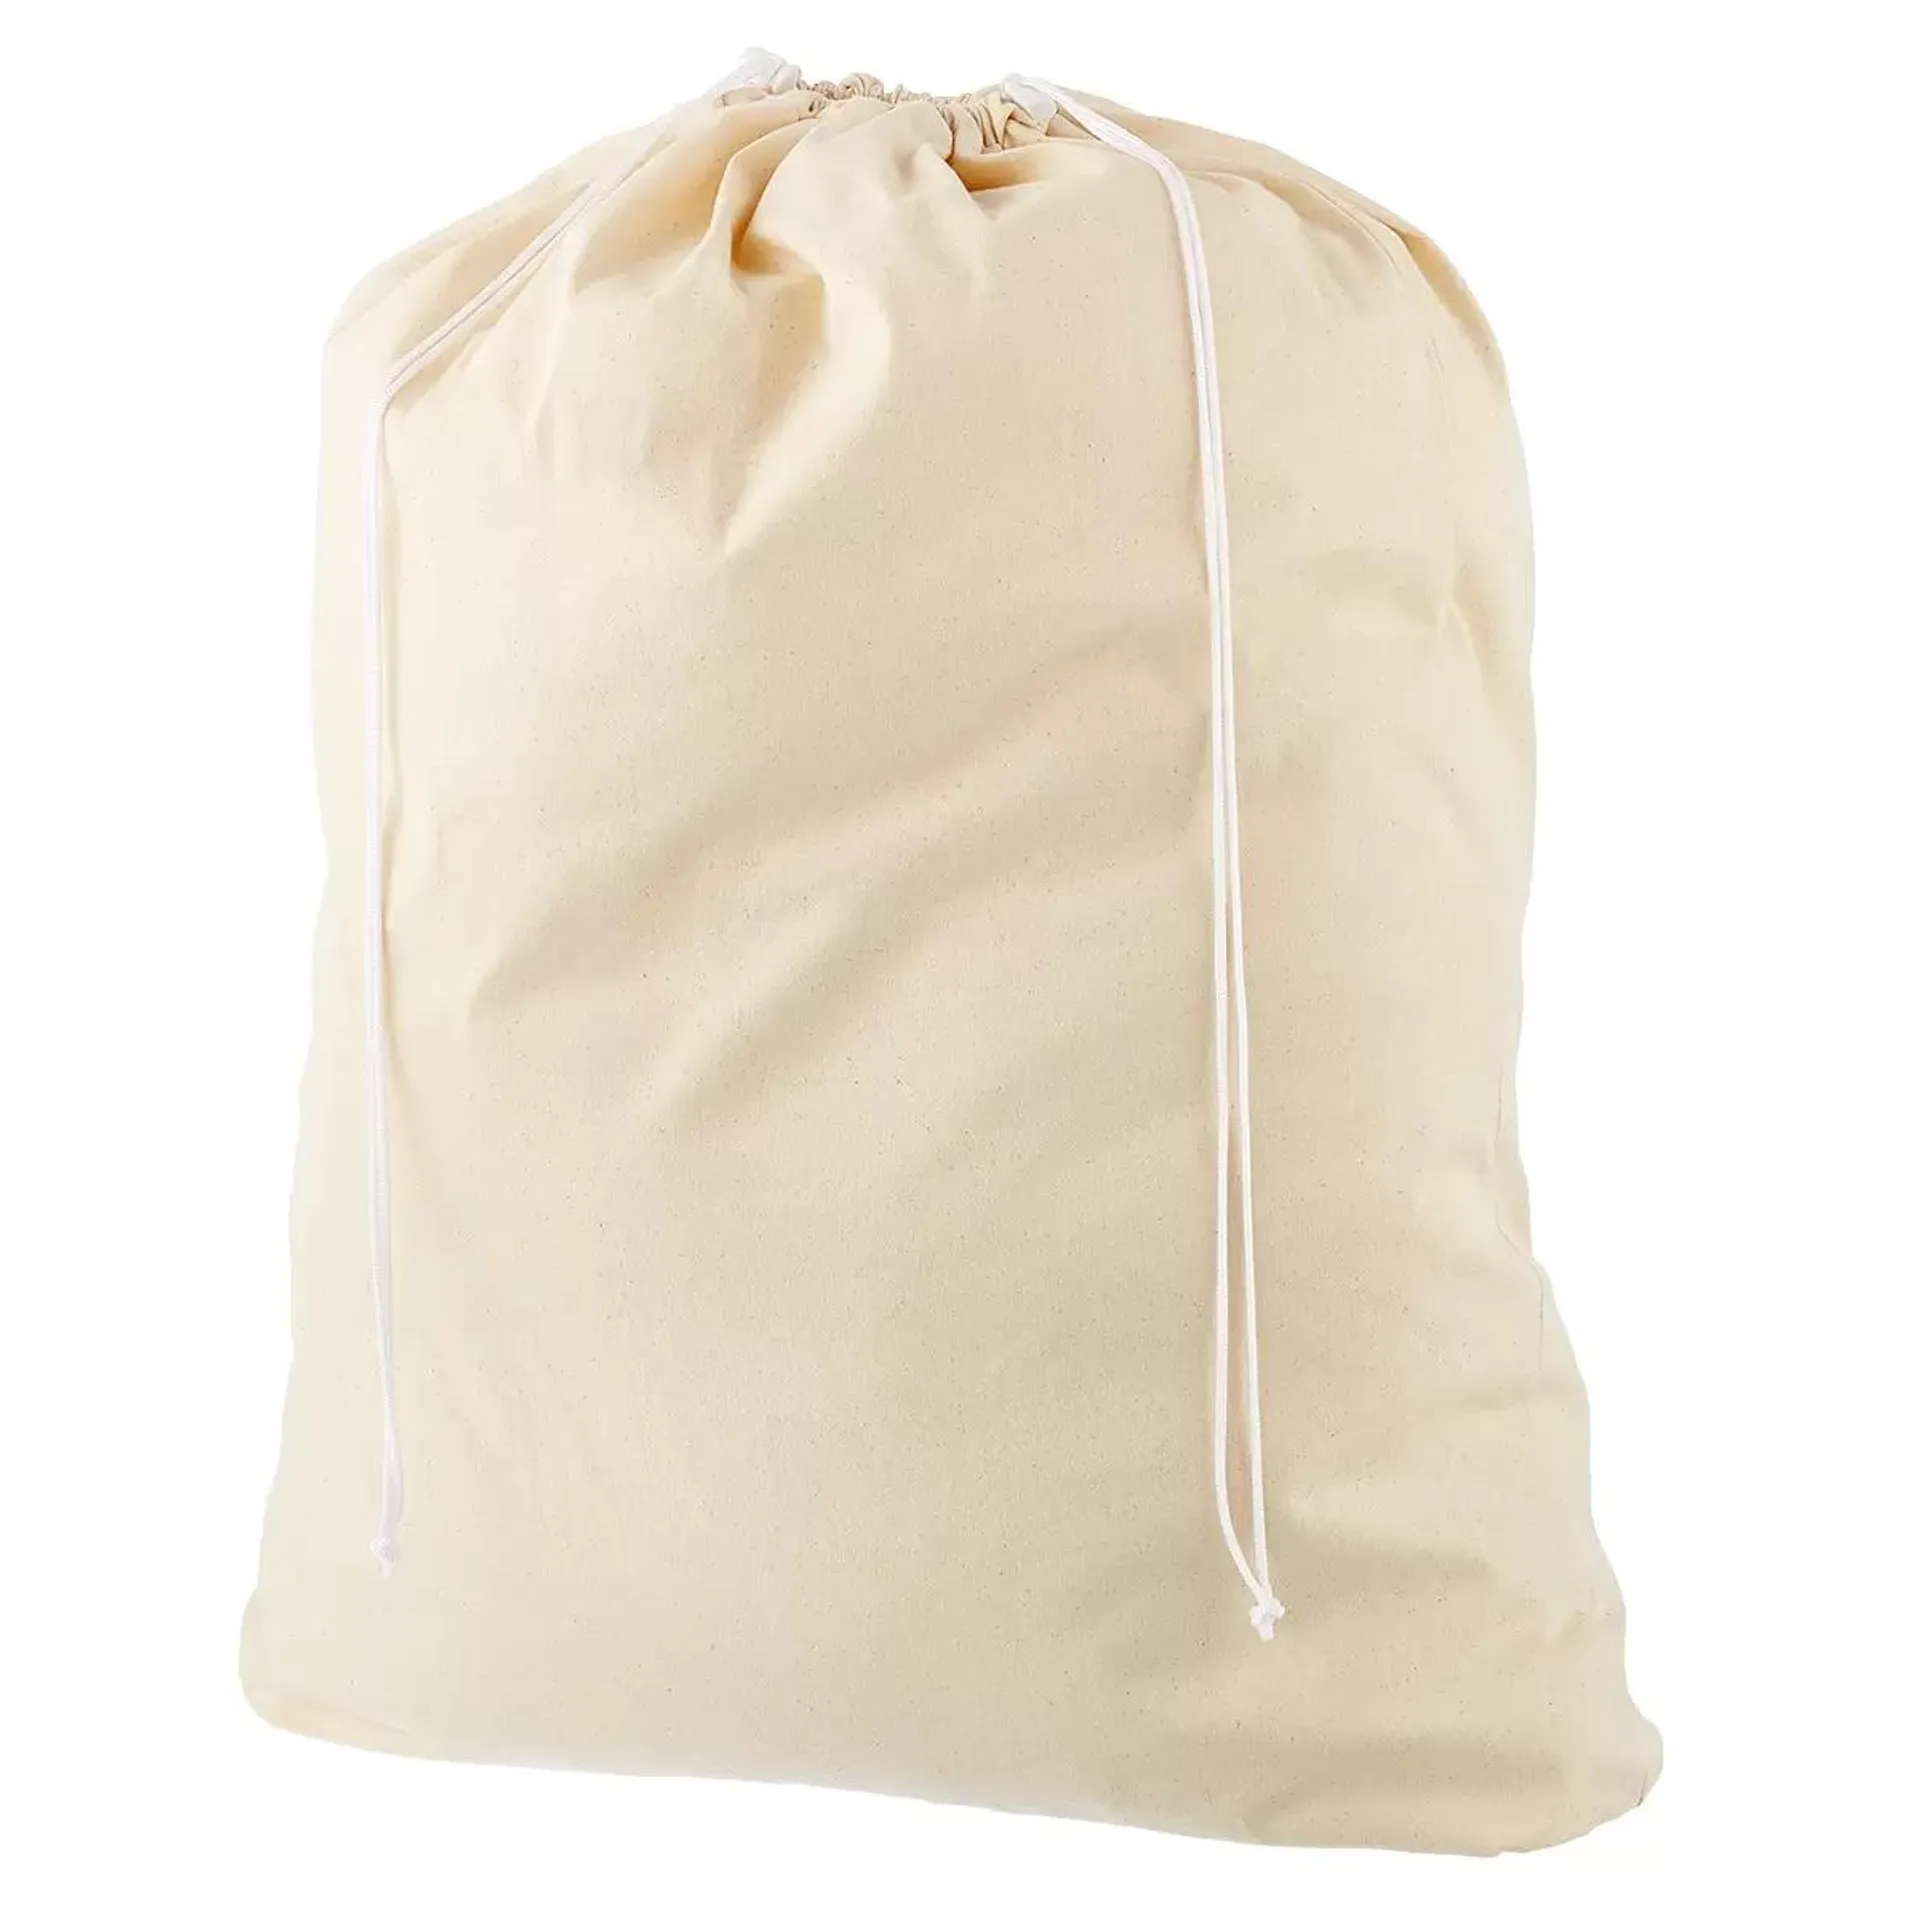 The Container Store Unbleached Cotton Laundry Bag Natural